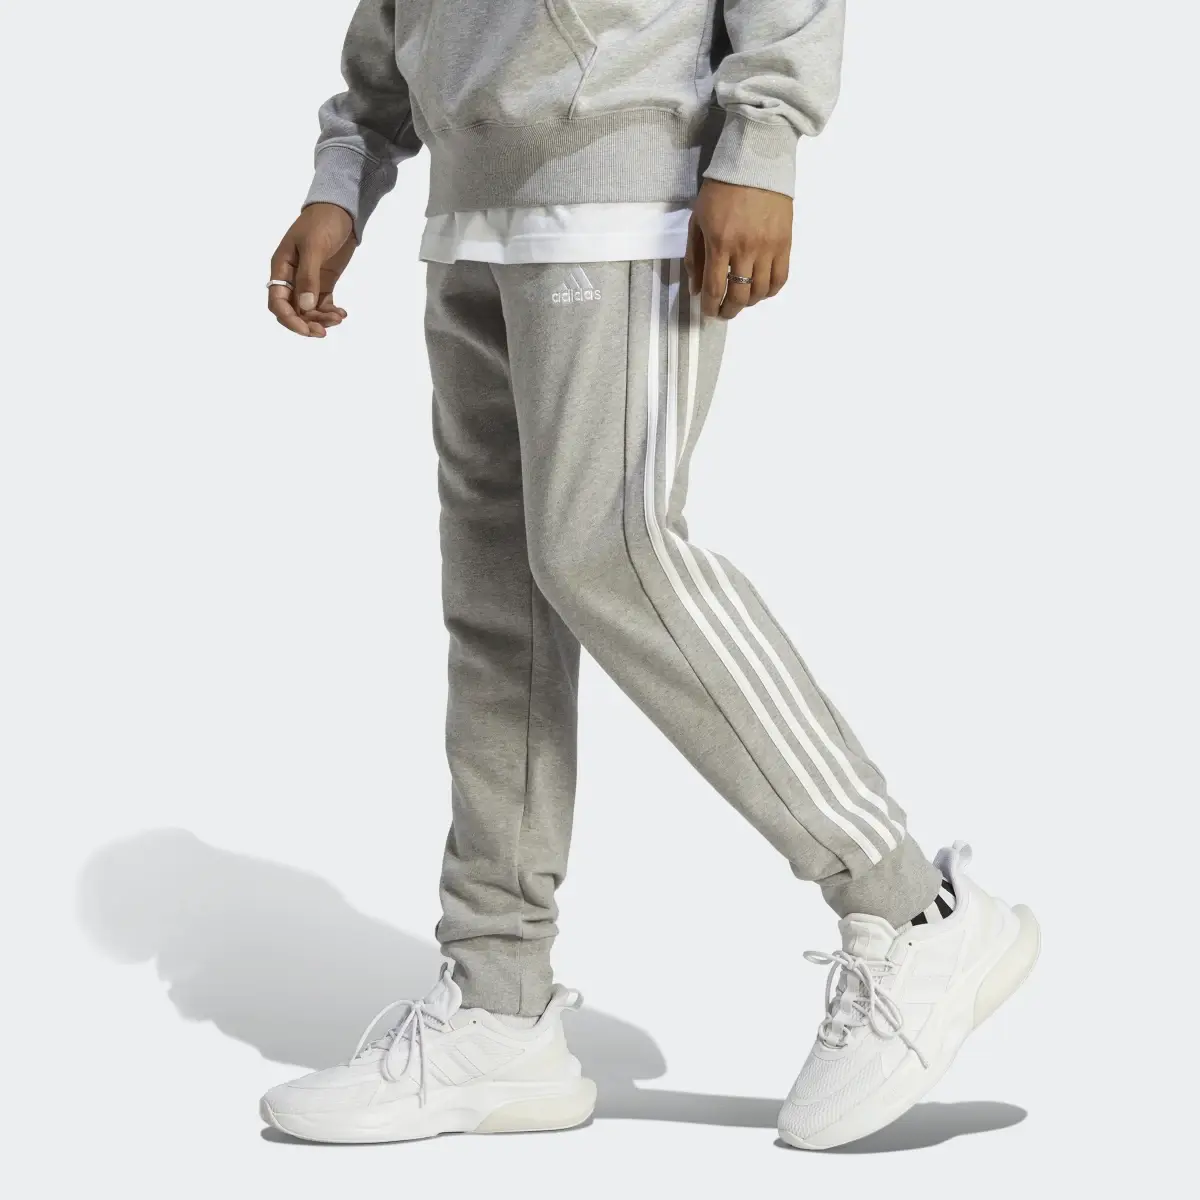 Adidas Essentials French Terry Tapered Cuff 3-Stripes Joggers. 1